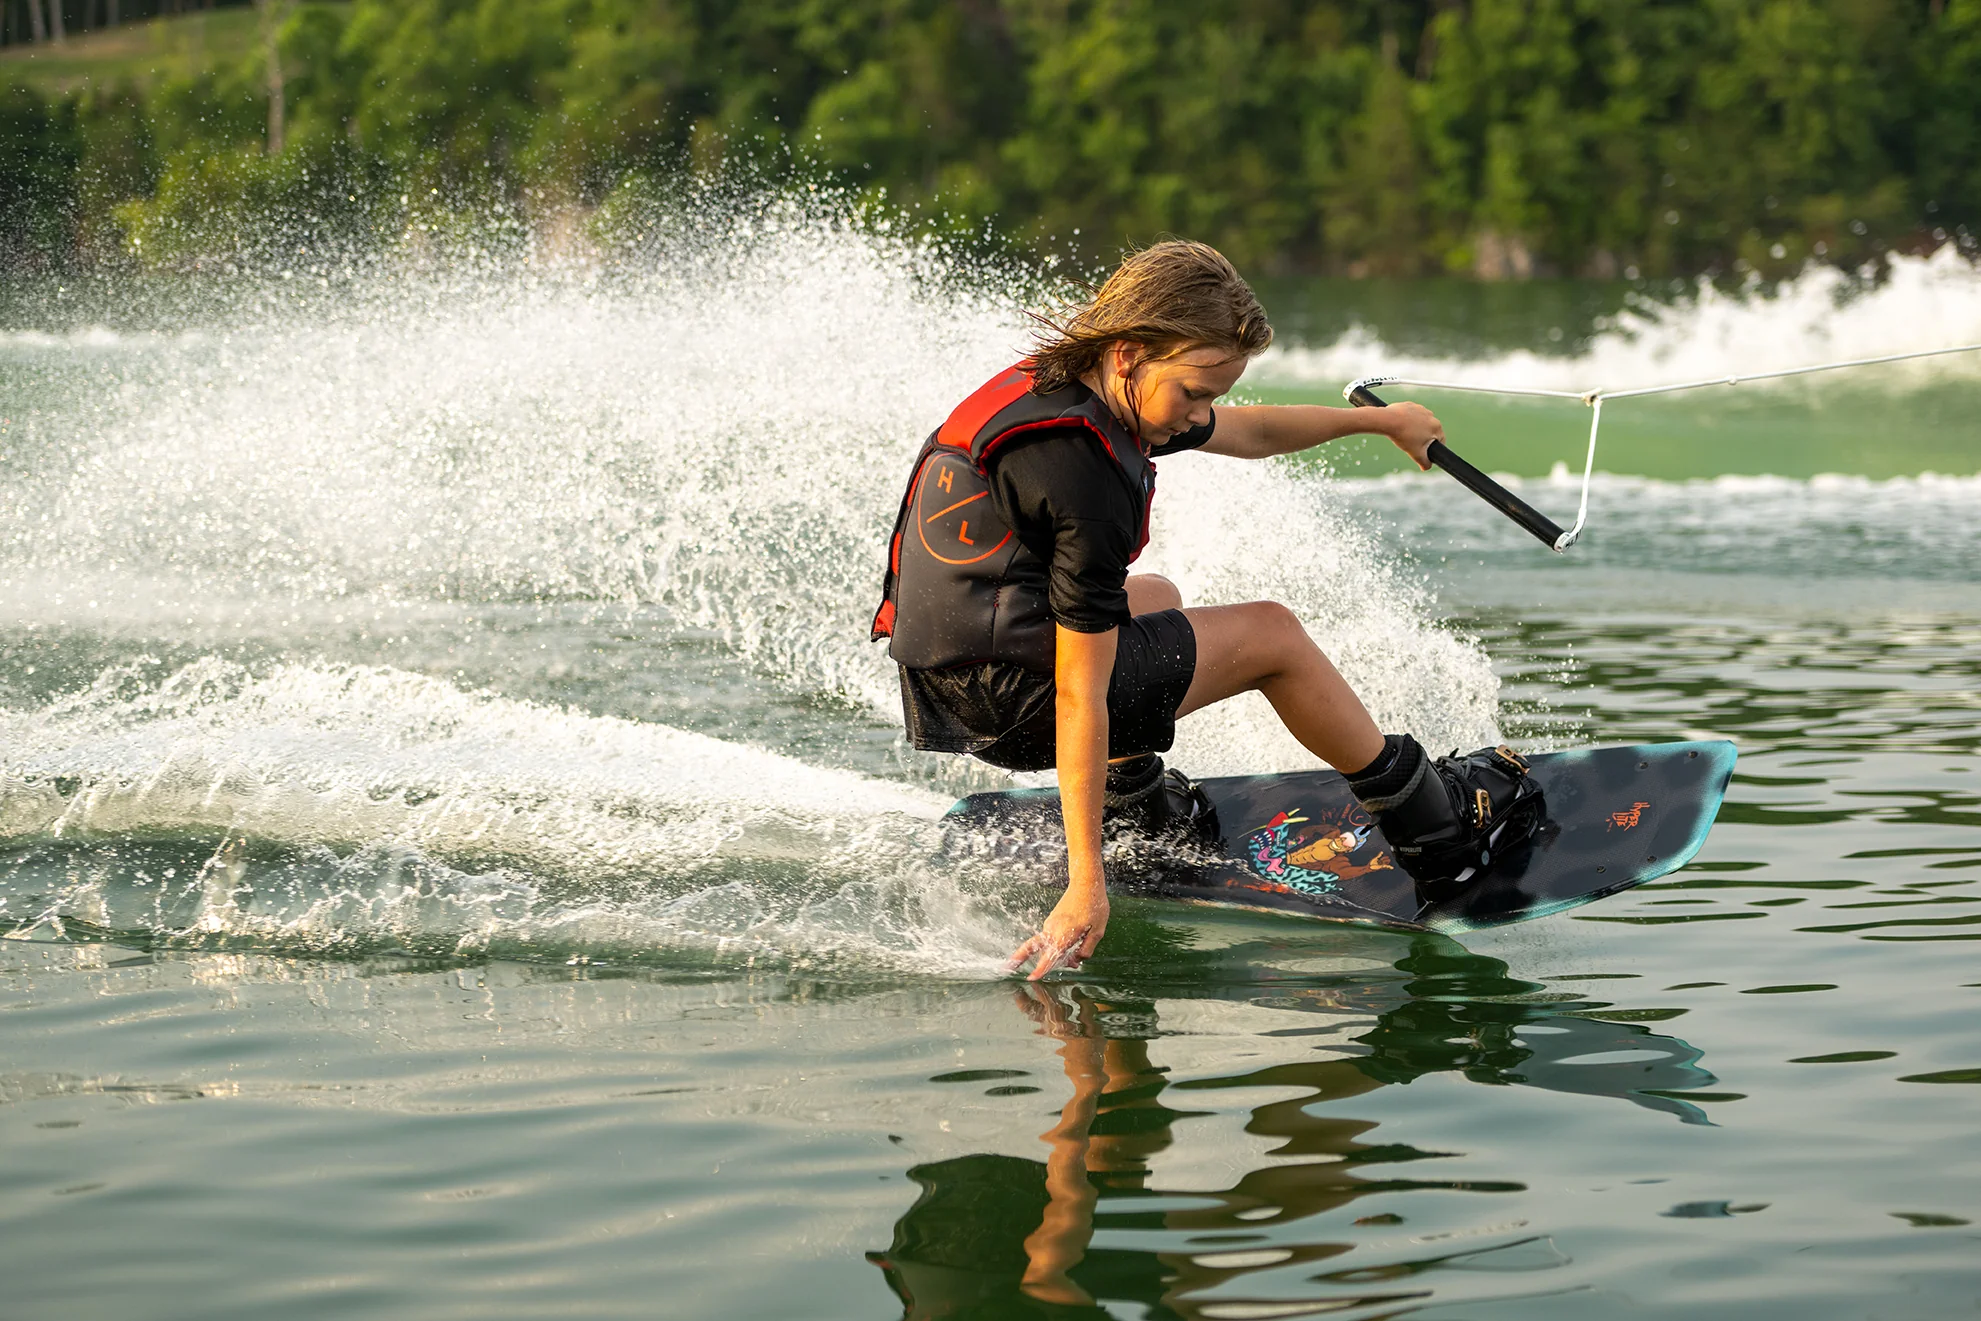 Kids Wakeboards